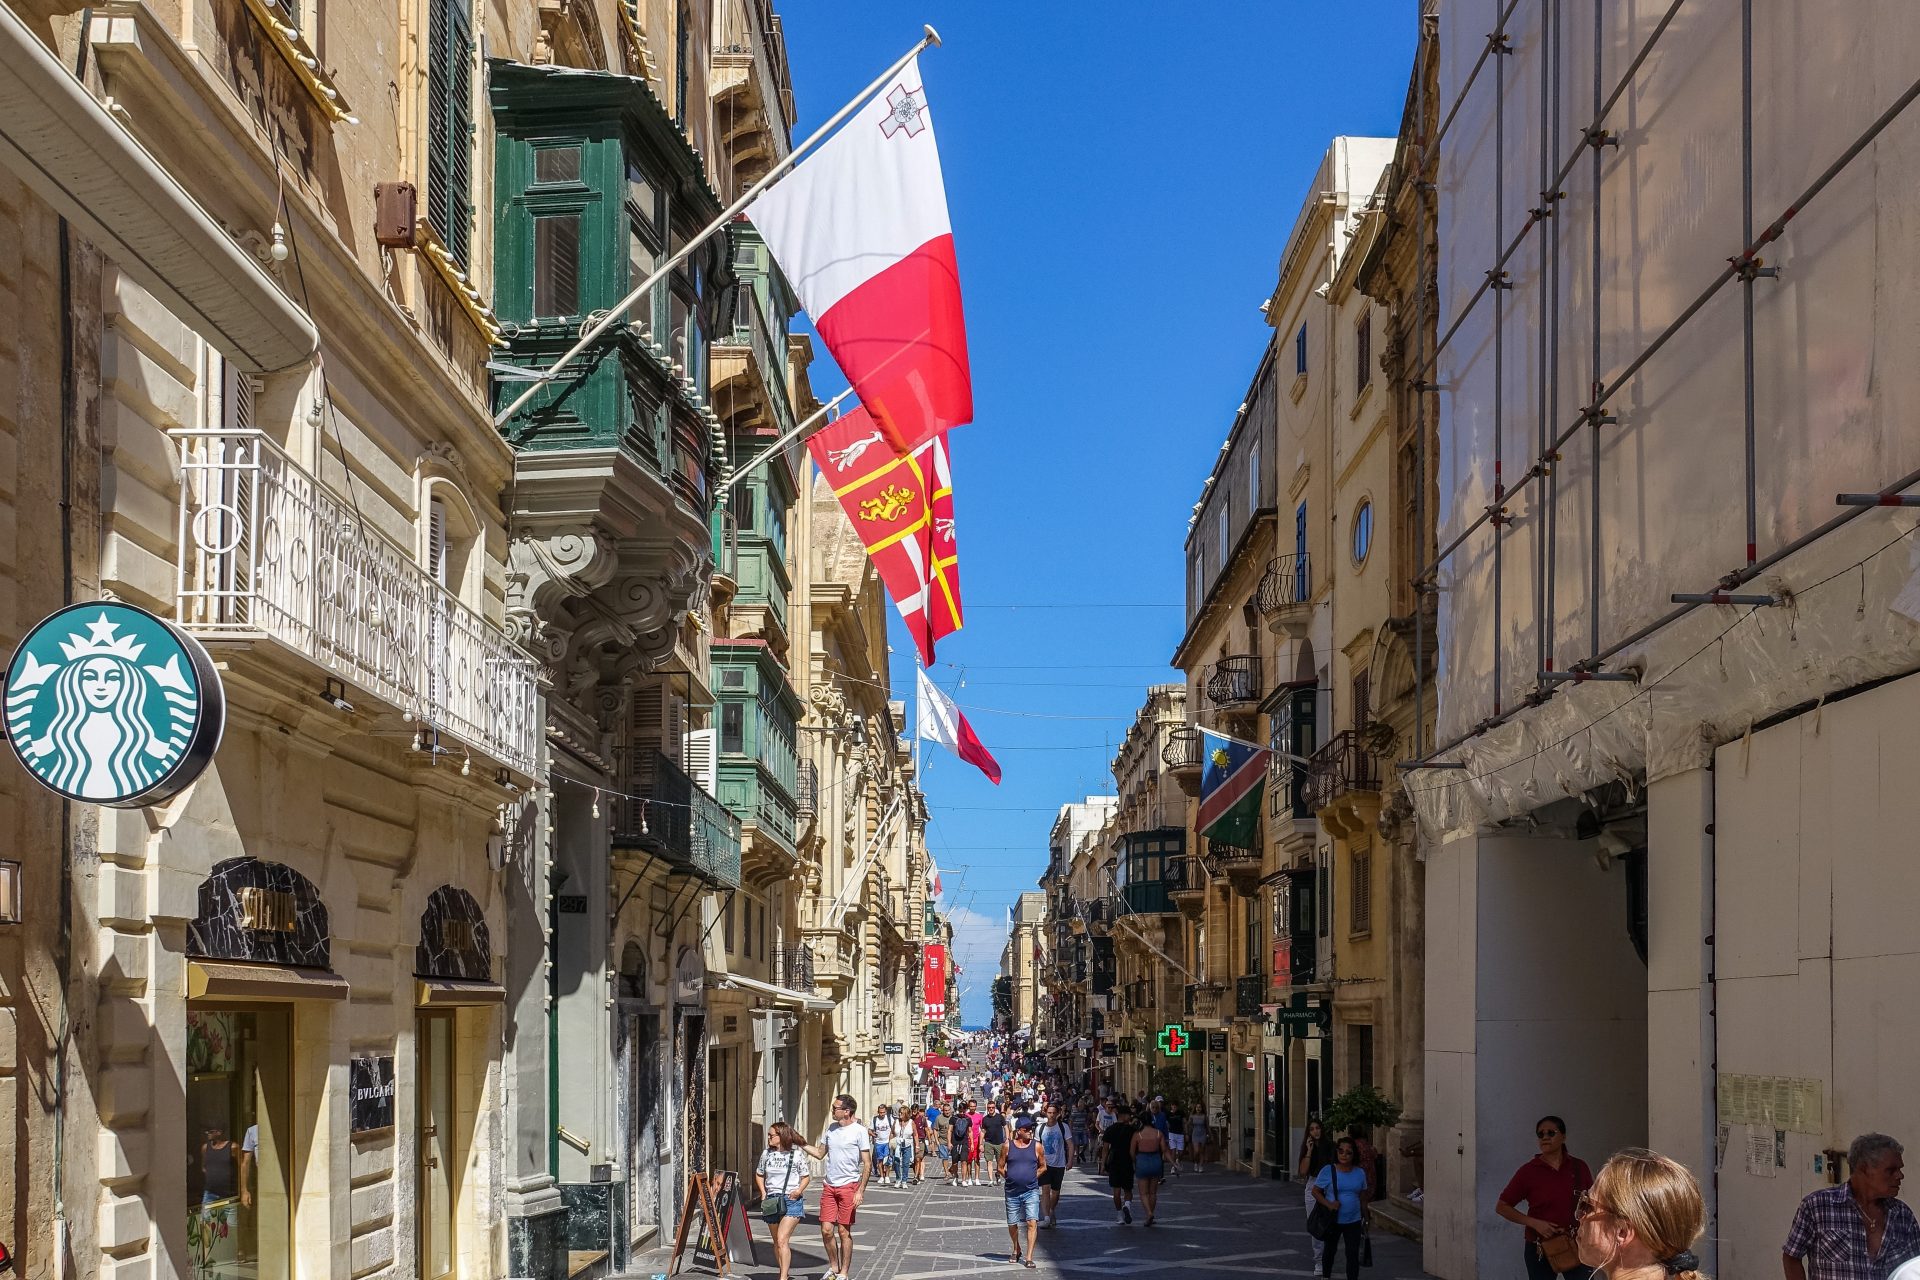 Malta is a perfect example 